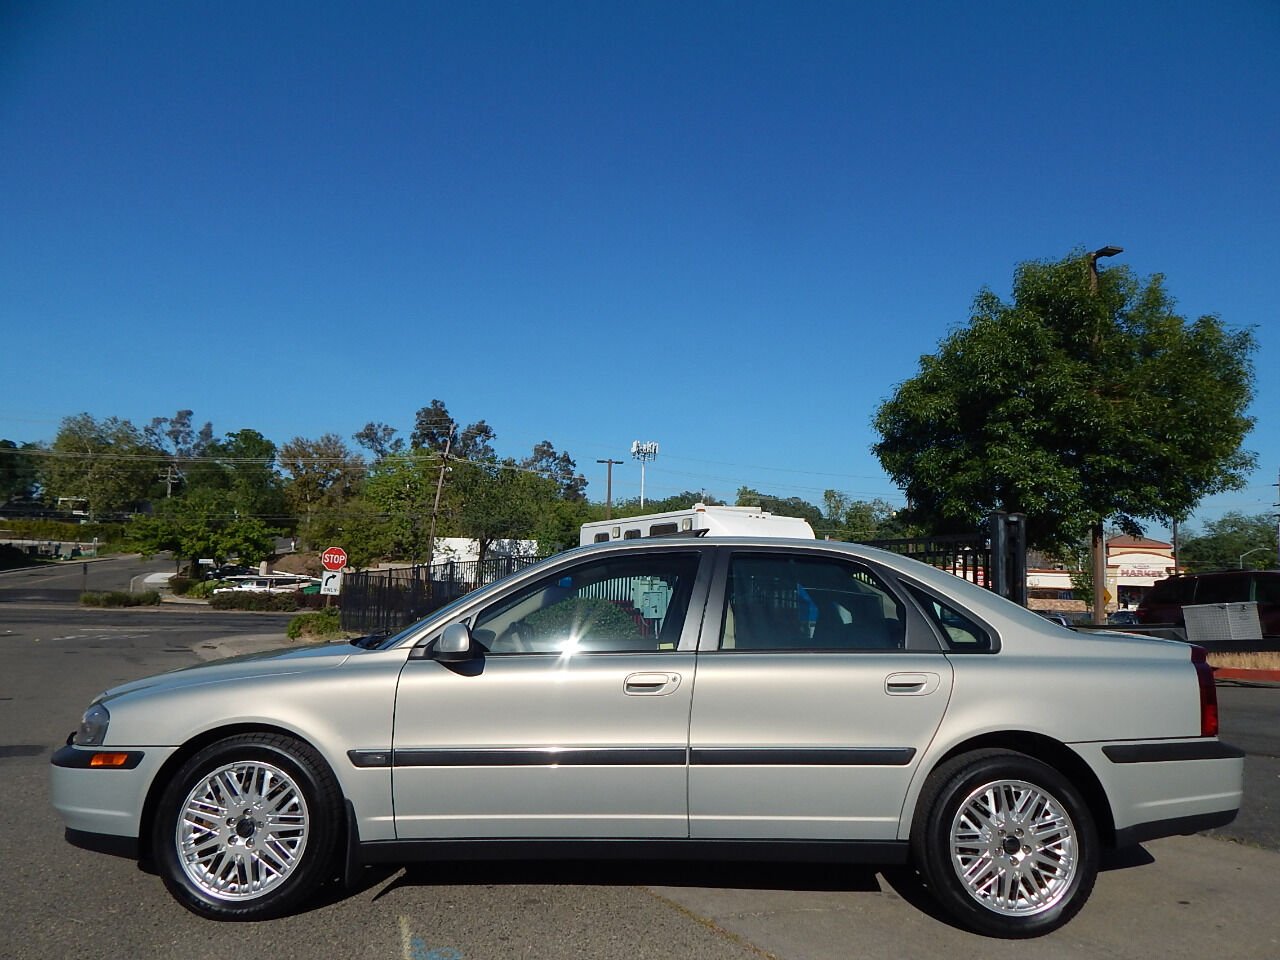 2001 Volvo S80 For Sale - Carsforsale.com®